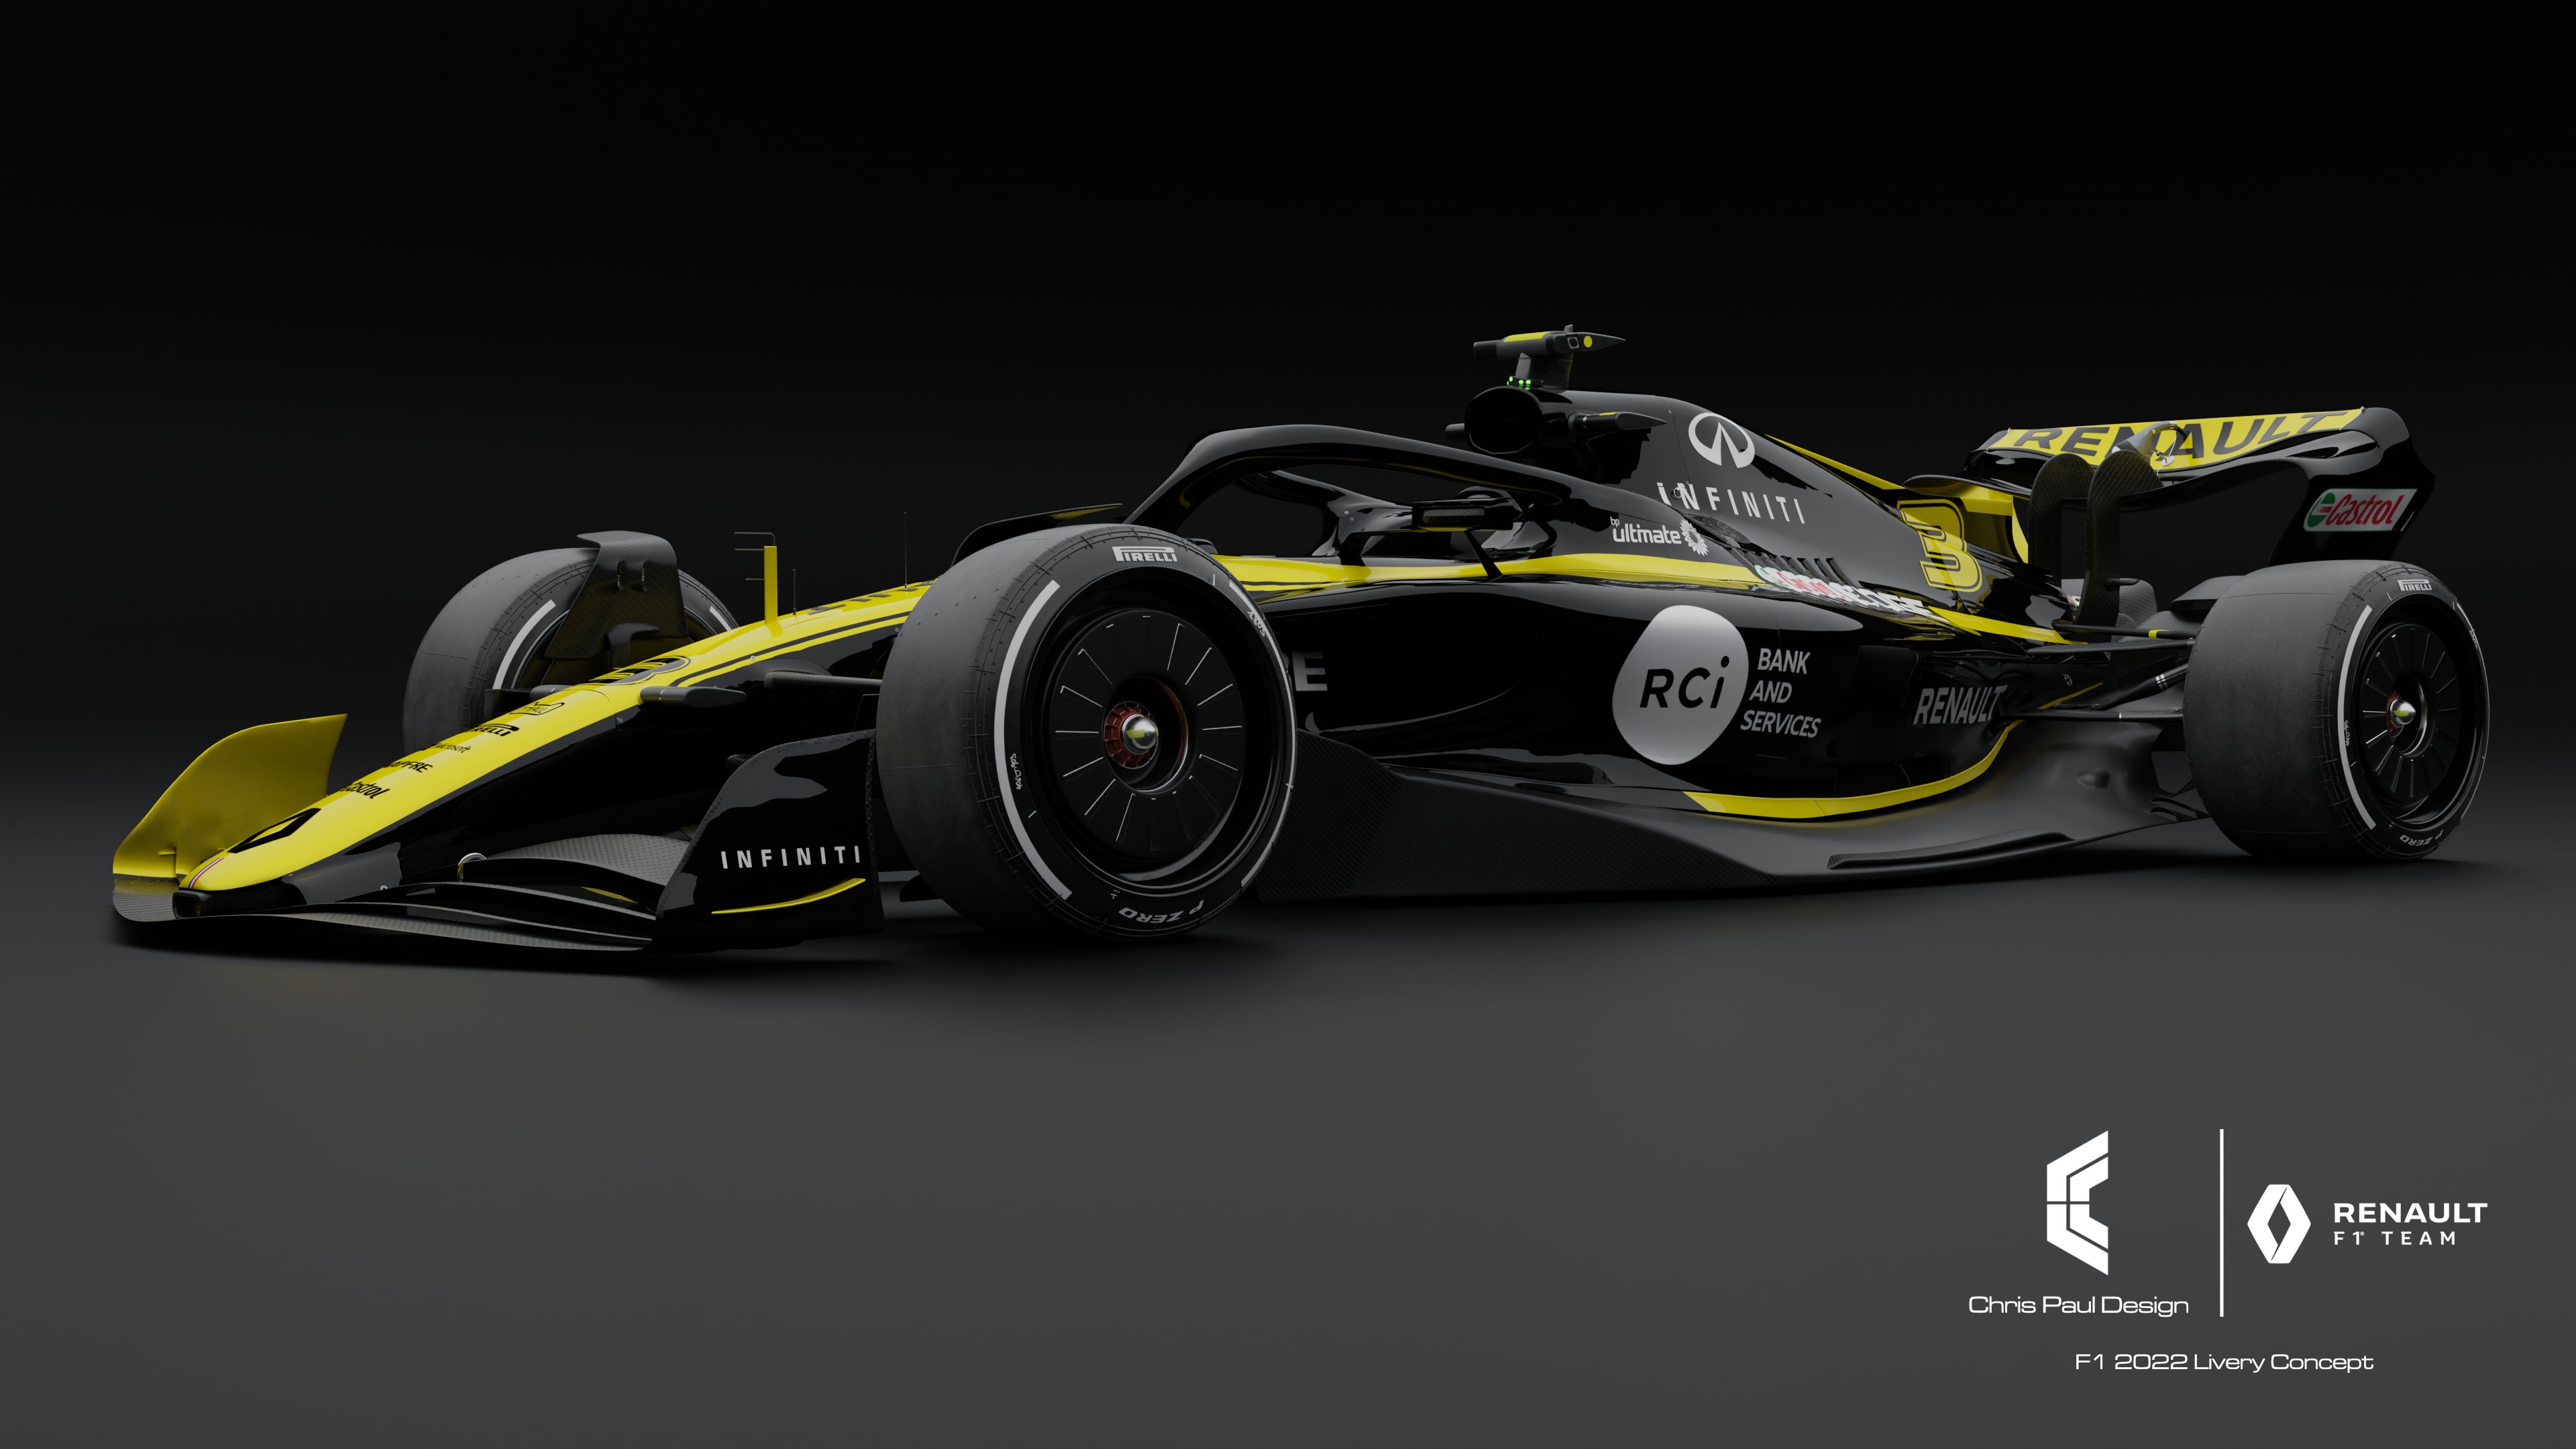 Chris Paul Design I Know Seanbulldesign And Racerdesigns Worked As Part Of The Design Team At Renault F1 And The Whole Design Team Delivered One Of My Favourite Turbo Hybrid